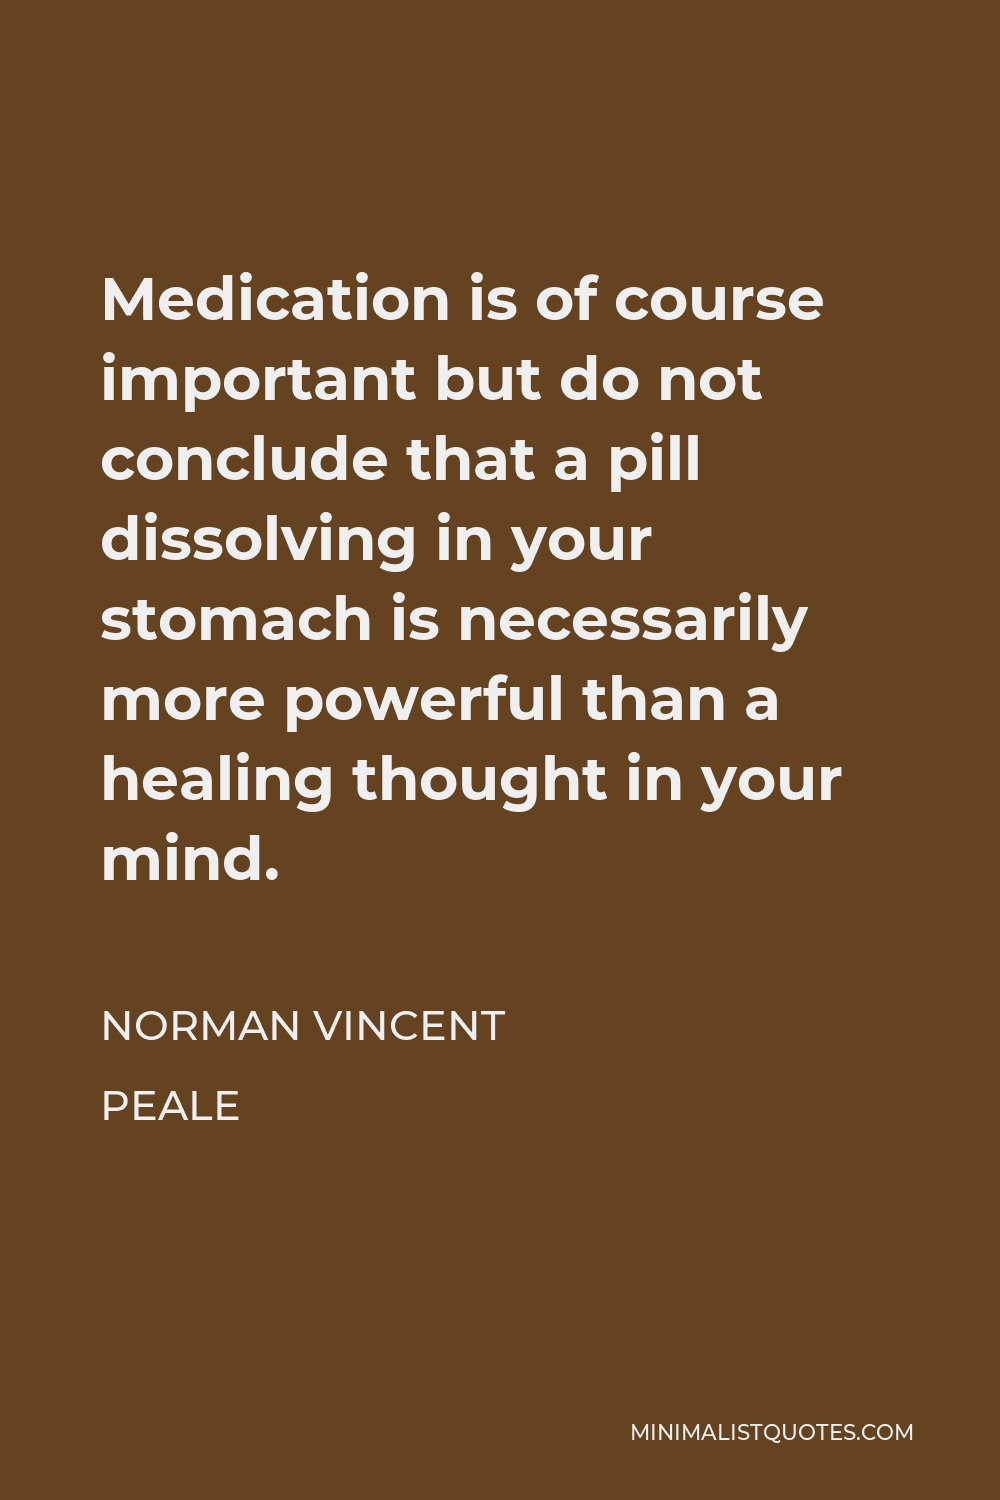 Norman Vincent Peale Quote - Medication is of course important but do not conclude that a pill dissolving in your stomach is necessarily more powerful than a healing thought in your mind.